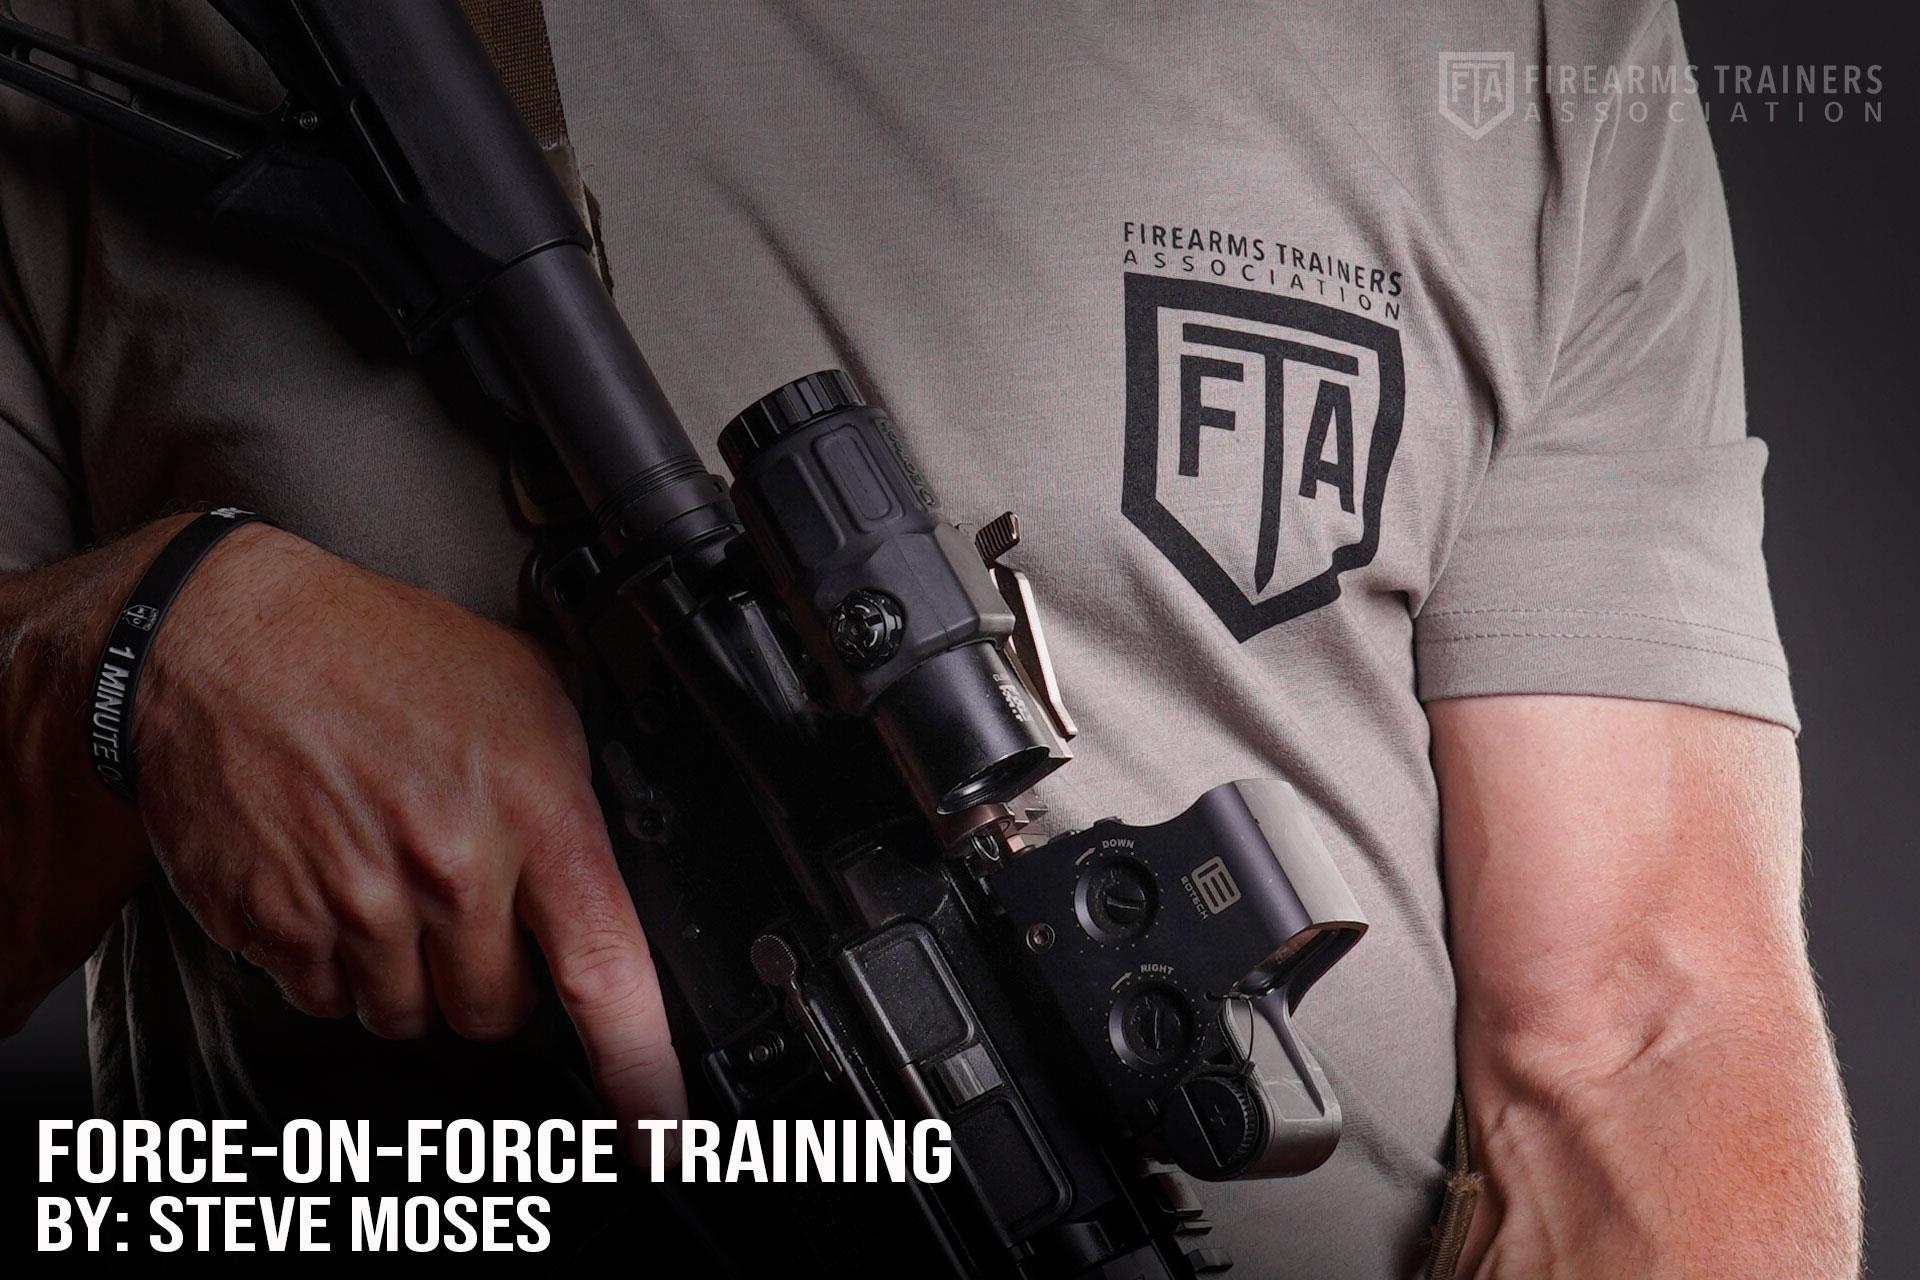 FORCE-ON-FORCE TRAINING